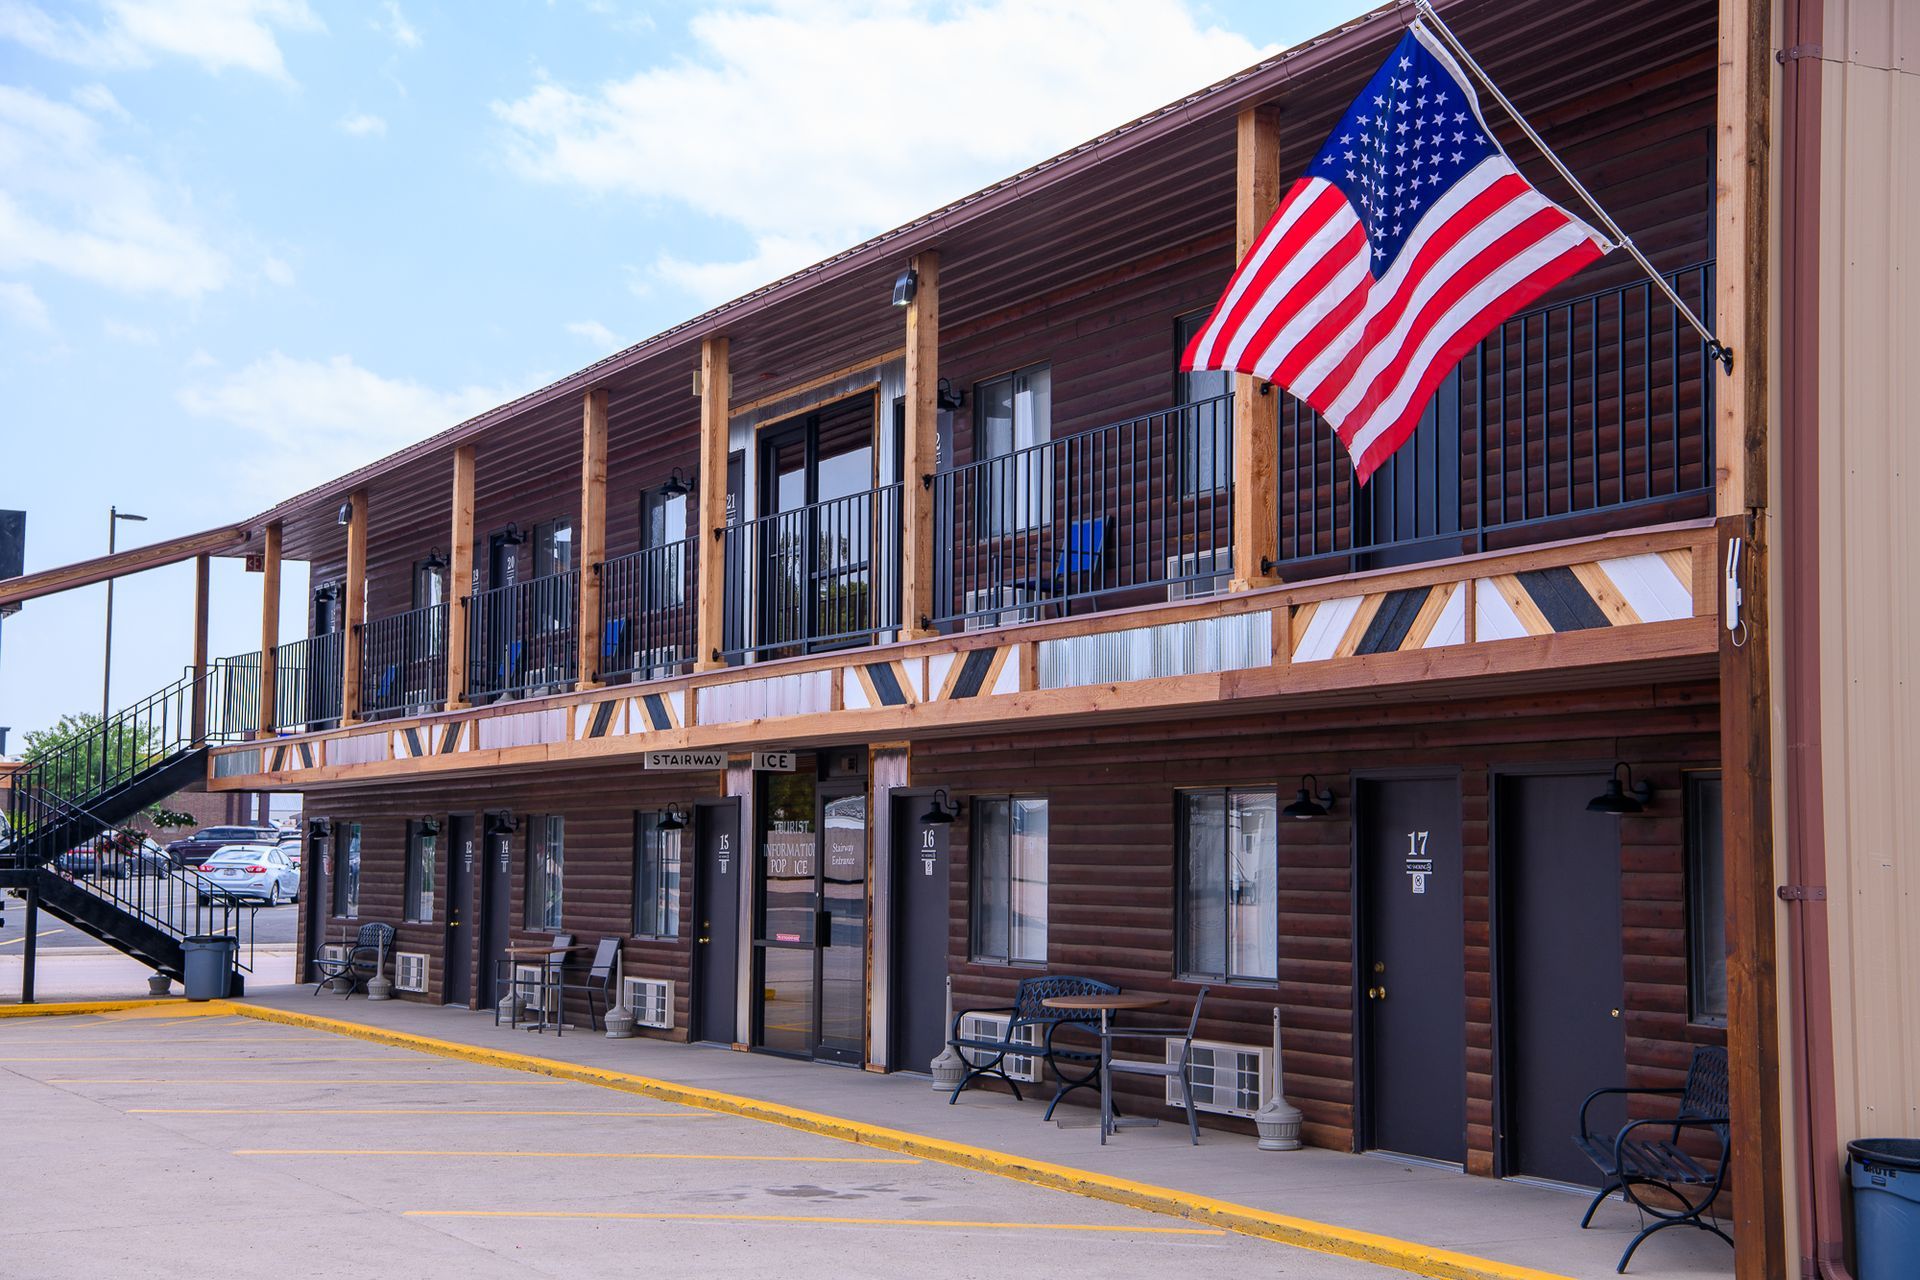 An american flag is flying in front of a motel.